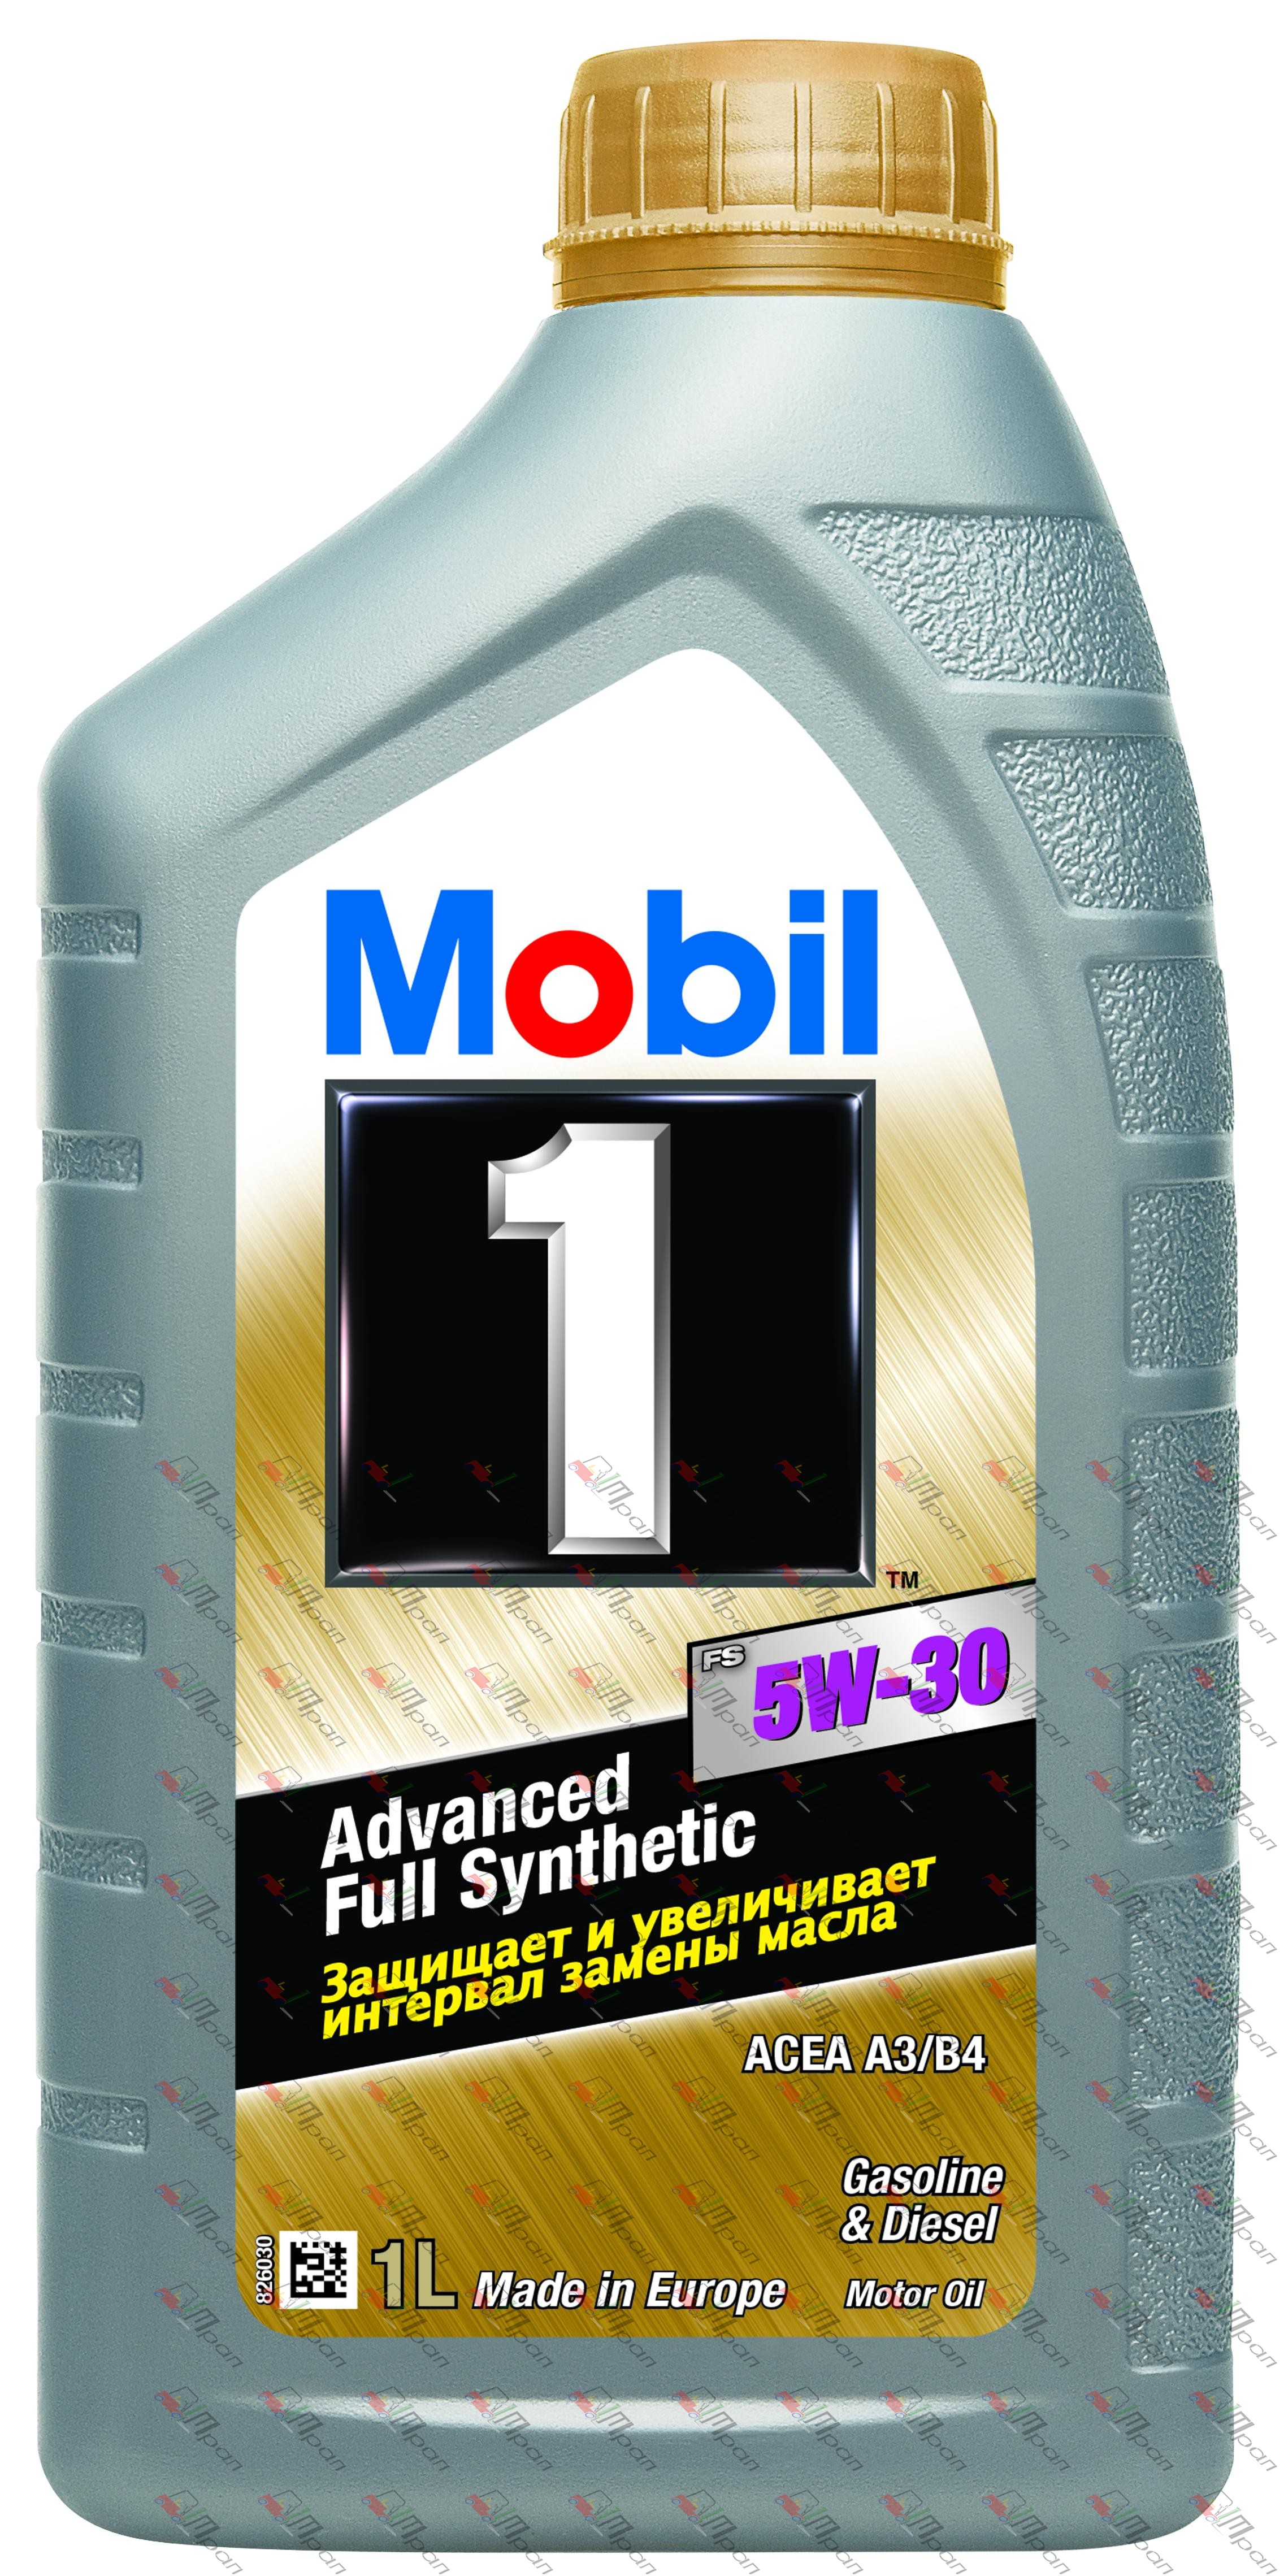 Mobil Масло моторное синтетич. Mobil 1 FS 5w30 1л